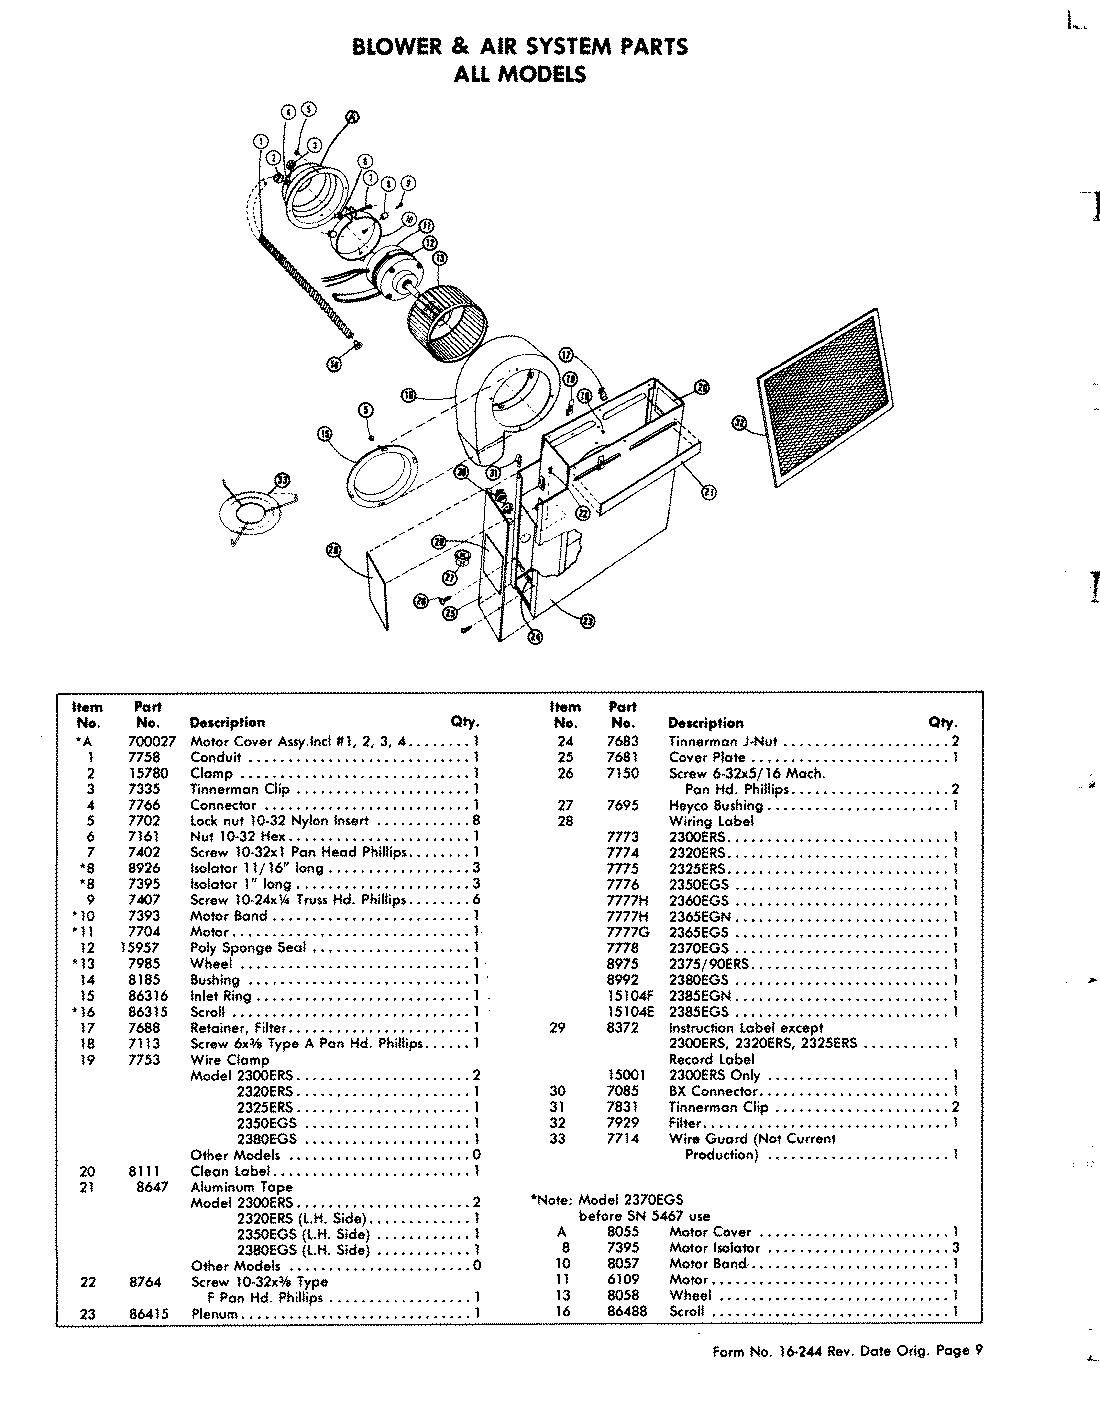 01 - BLOWER & AIR SYSTEM PARTS